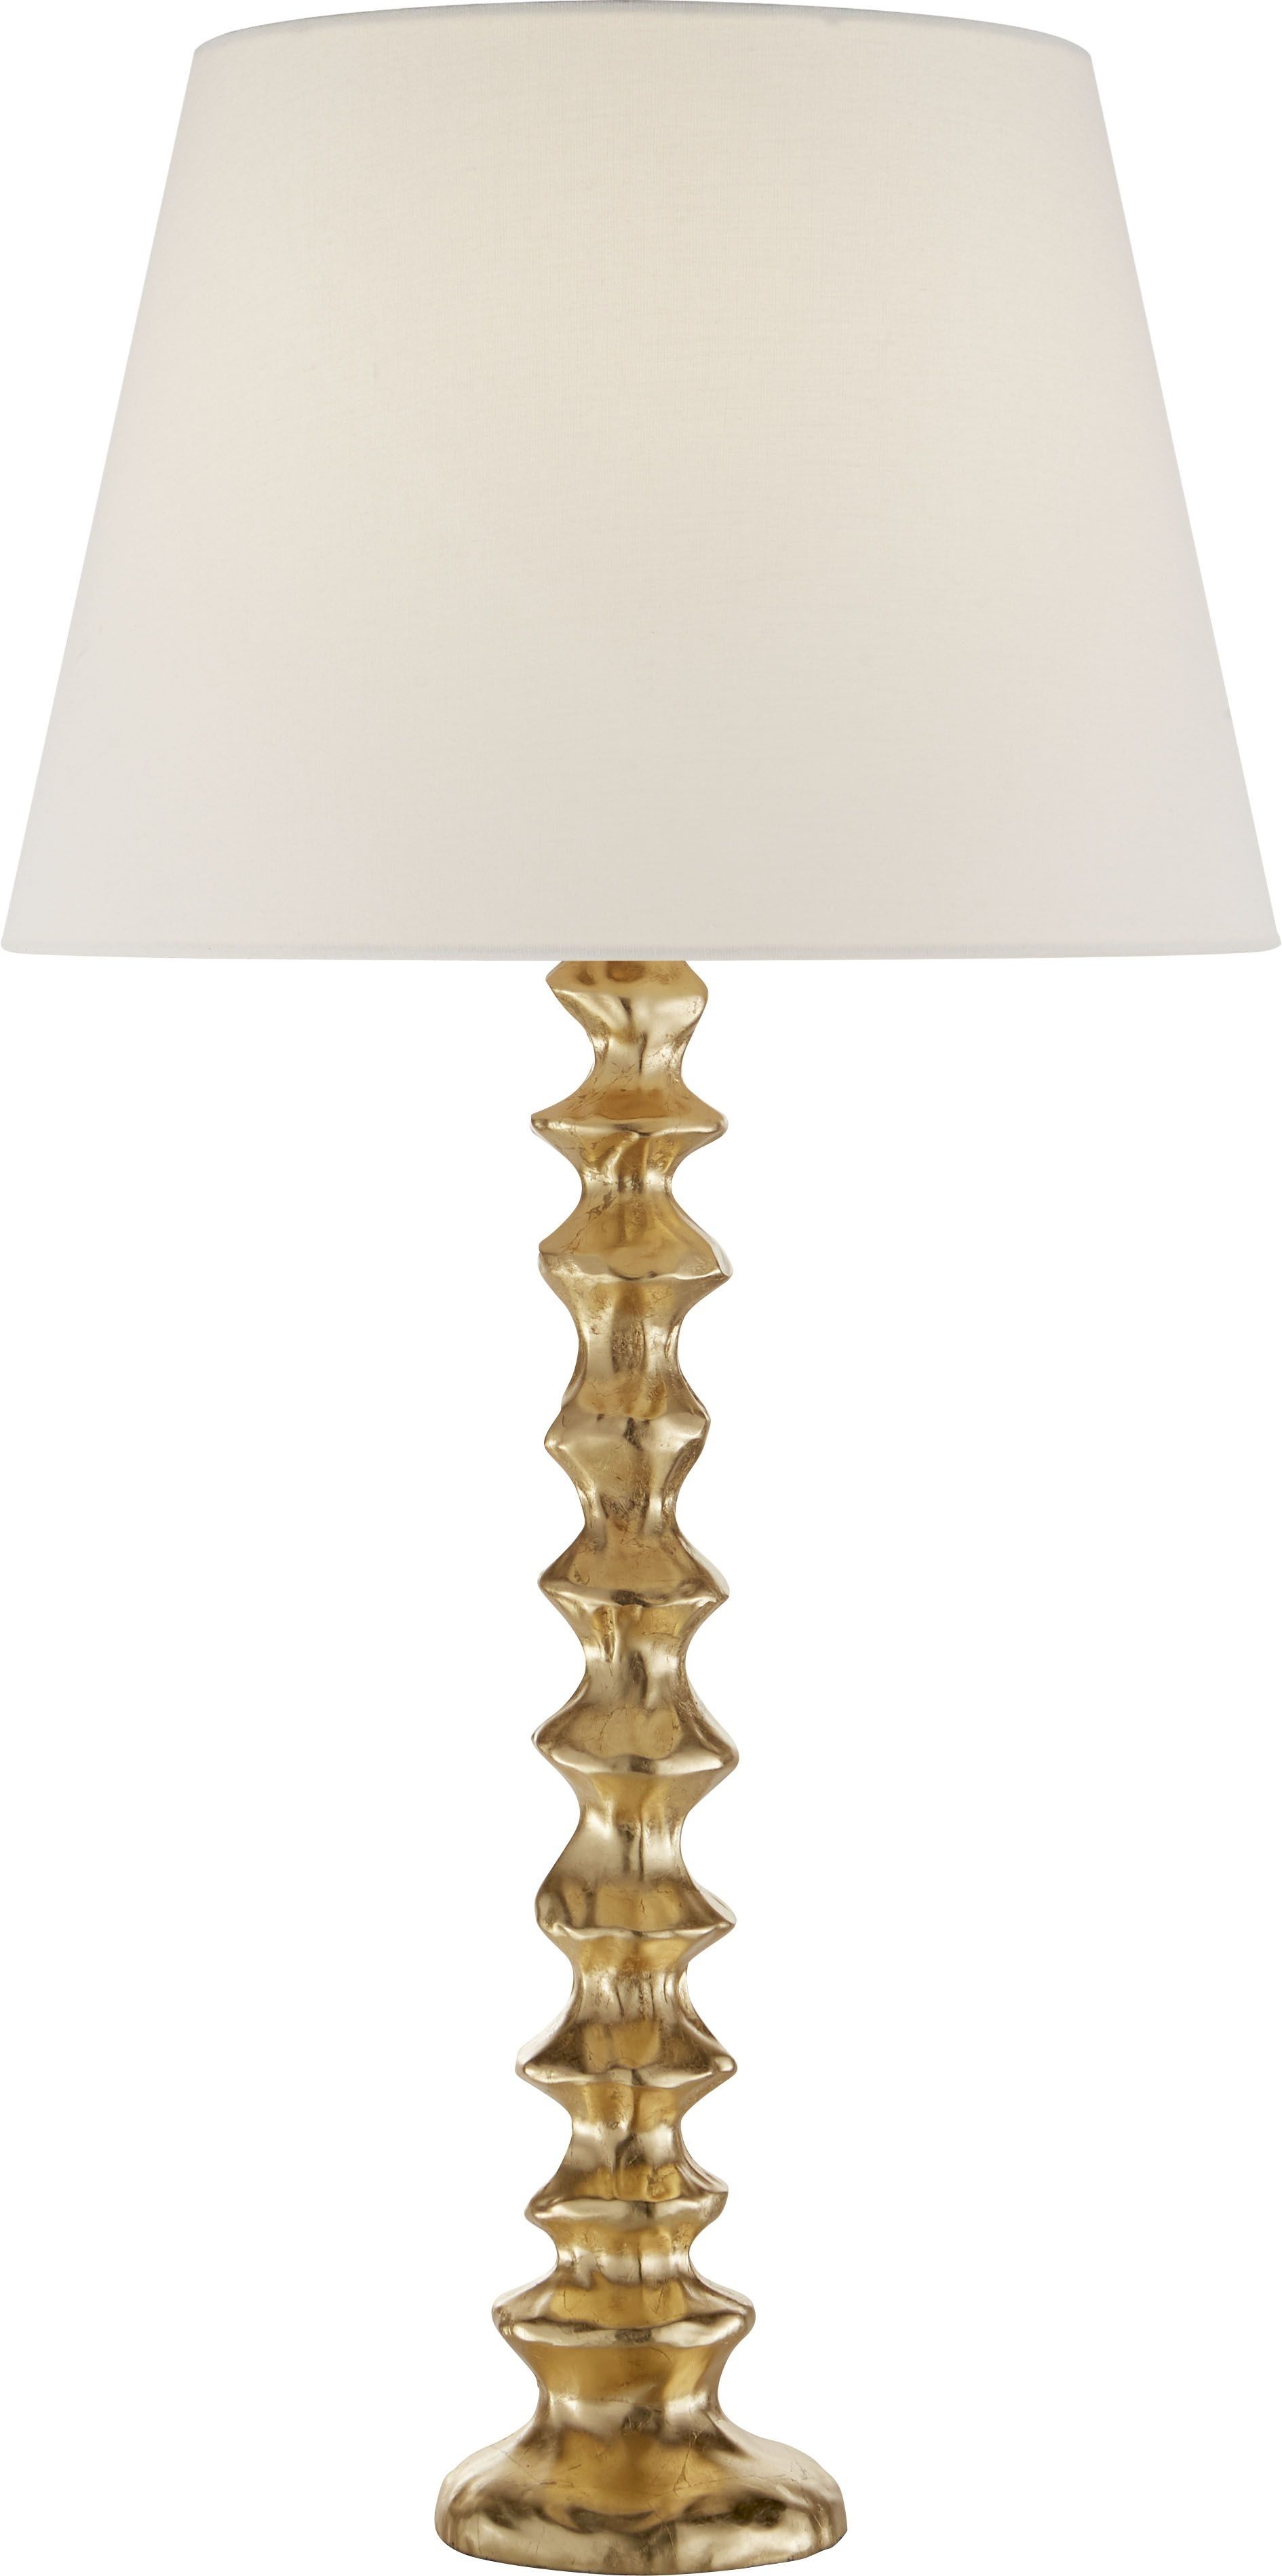 Furniture : Living Room Lamp Design Ashley Furniture Table Lamps Regarding Laura Ashley Table Lamps For Living Room (Photo 6 of 15)